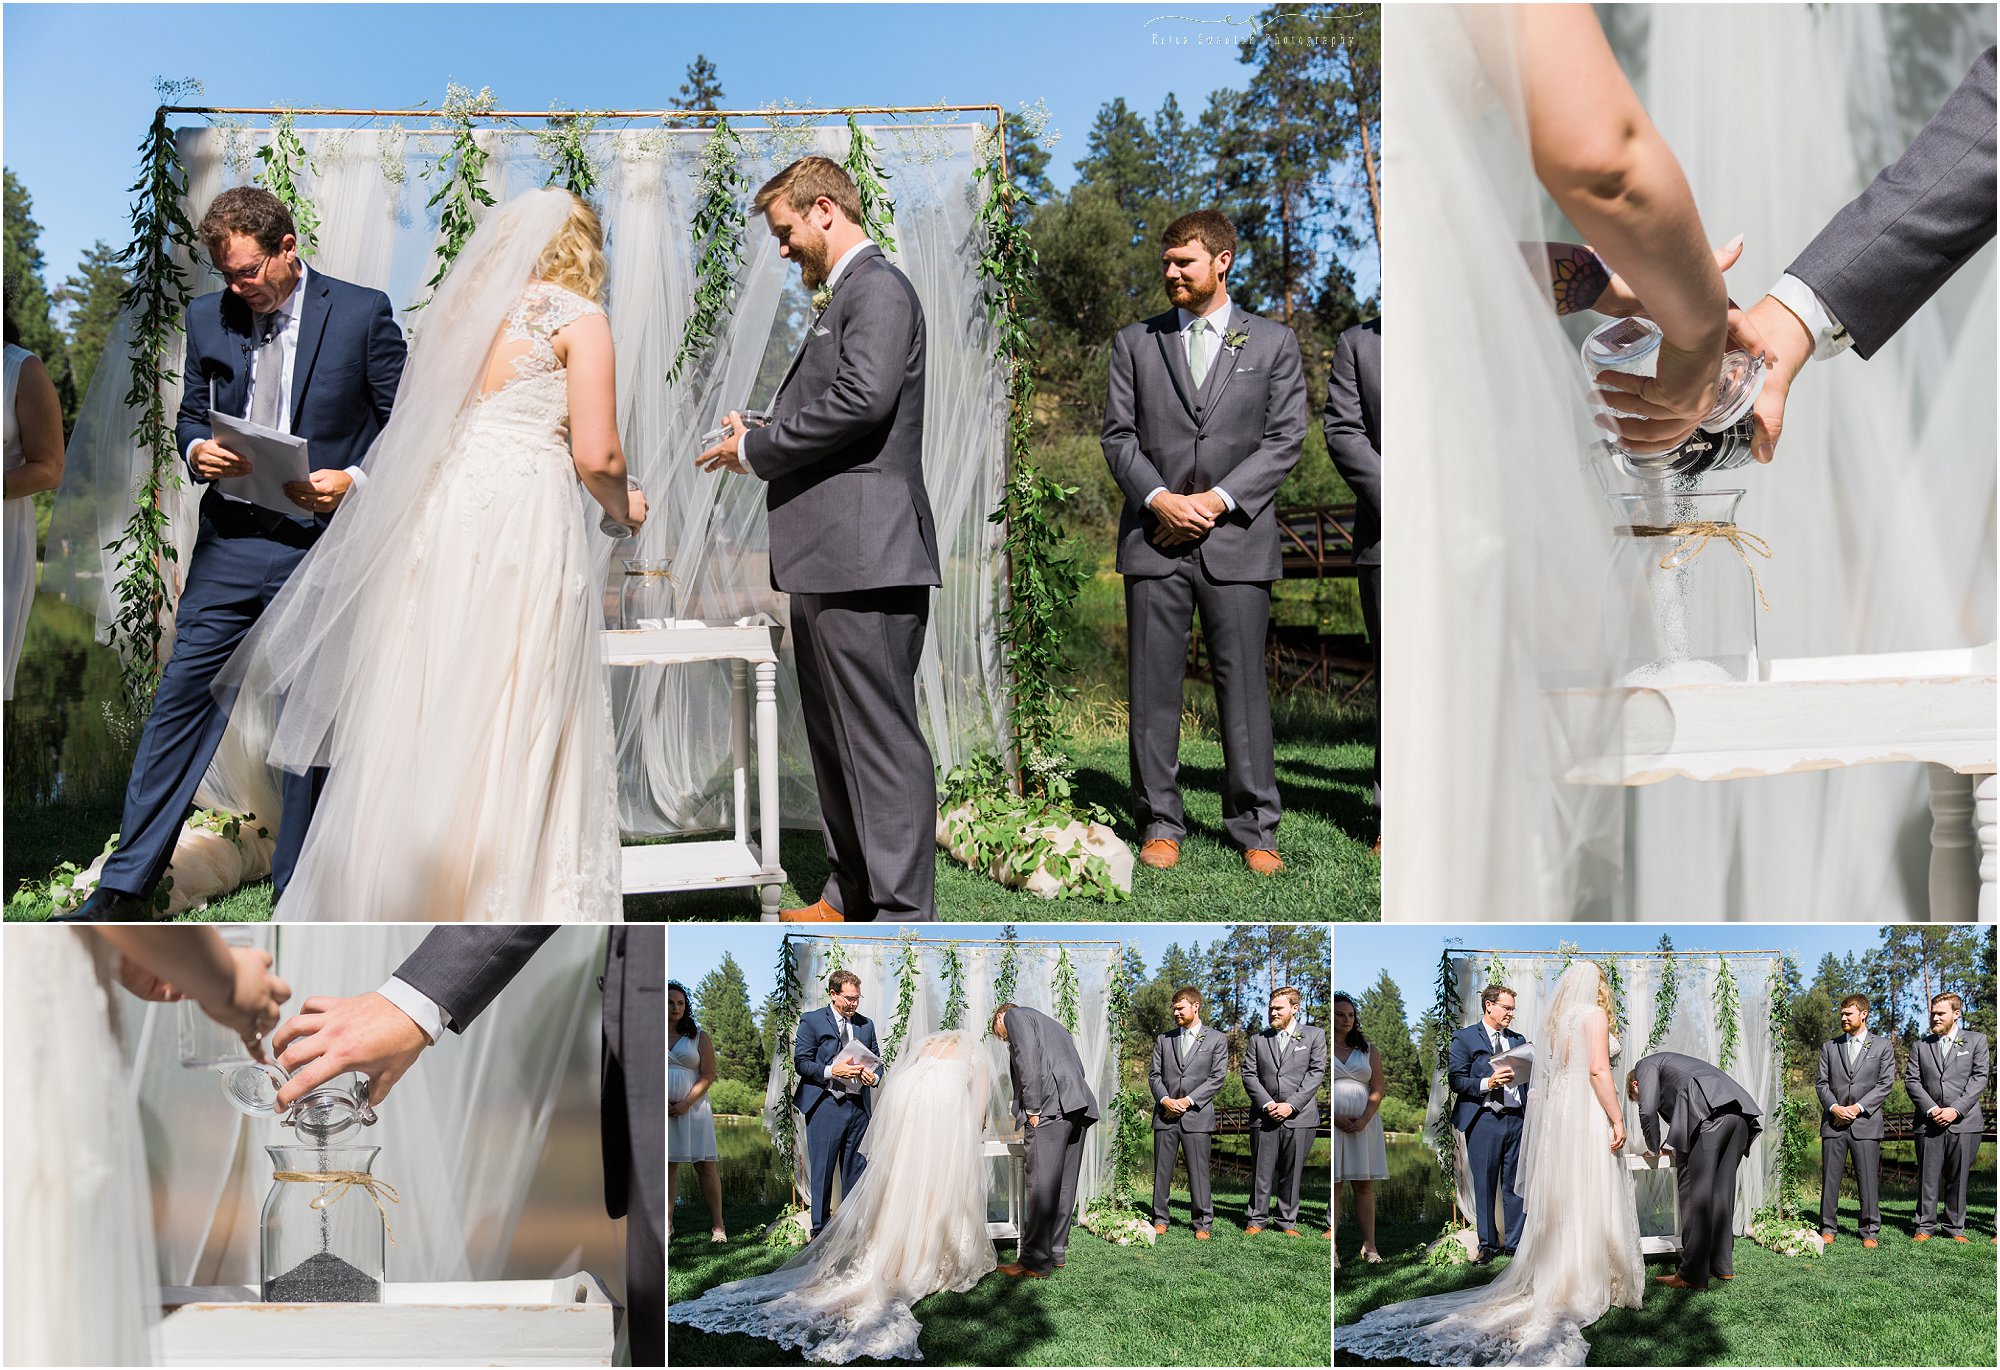 A beautiful wedding ceremony in front of Shevlin Pond in Bend, OR. | Erica Swantek Photography